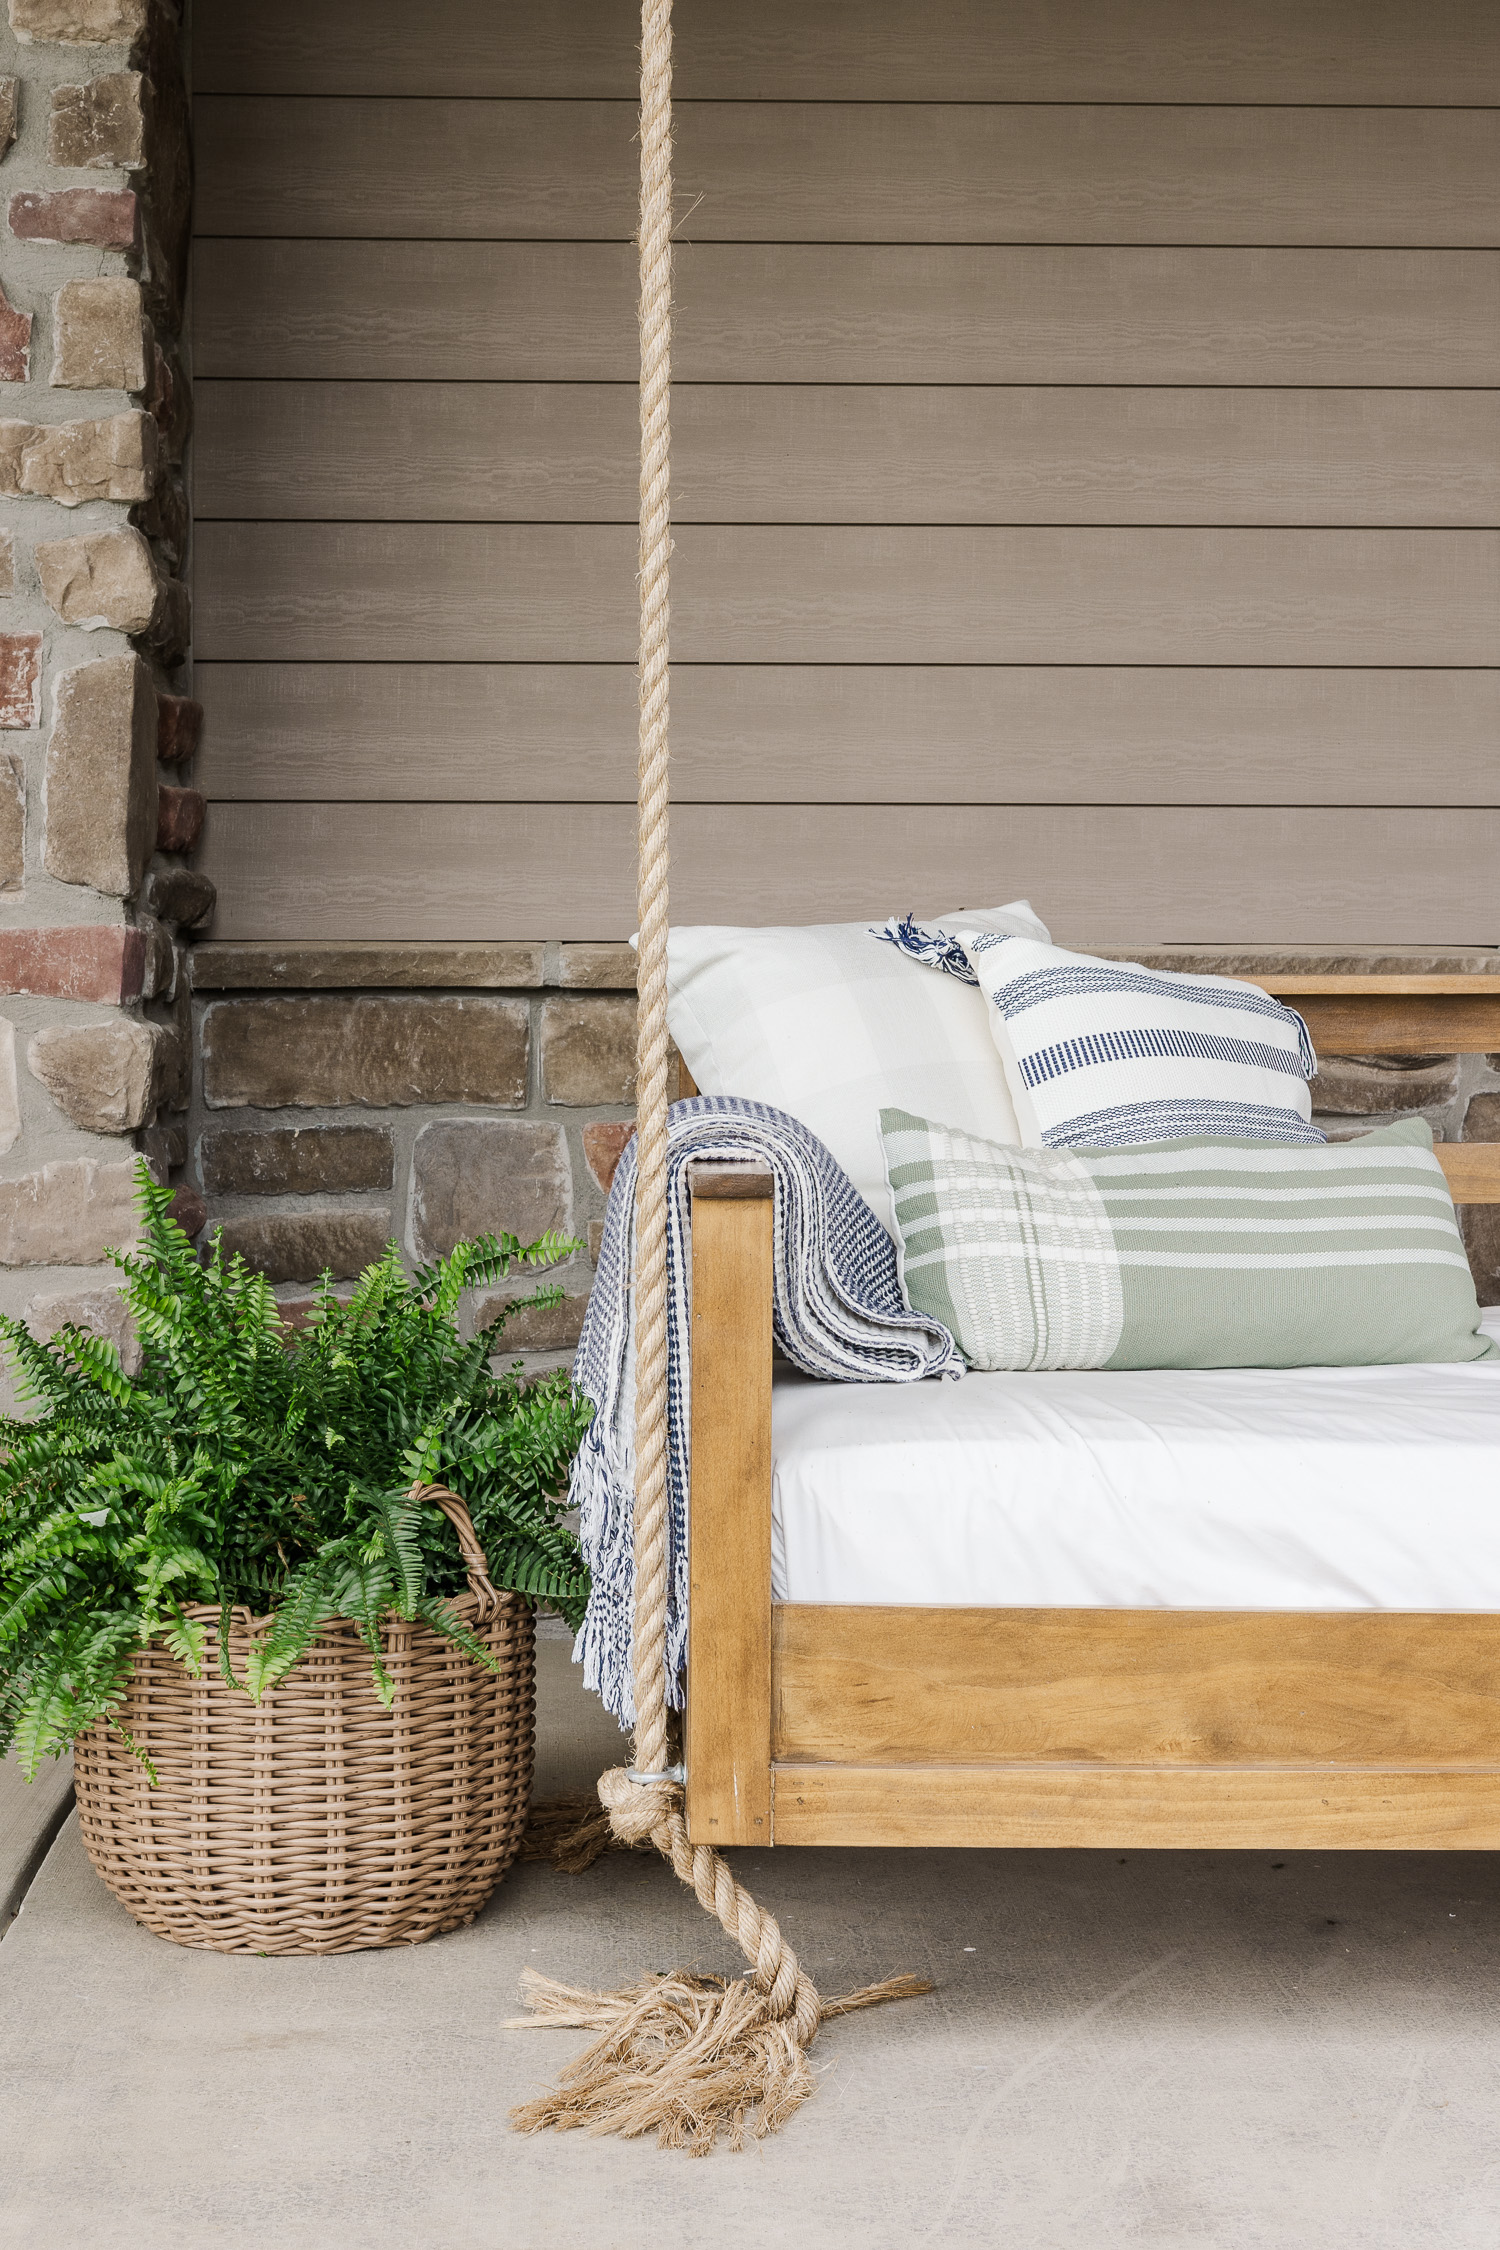 porch swing bed on patio with fern, pillows and blanket